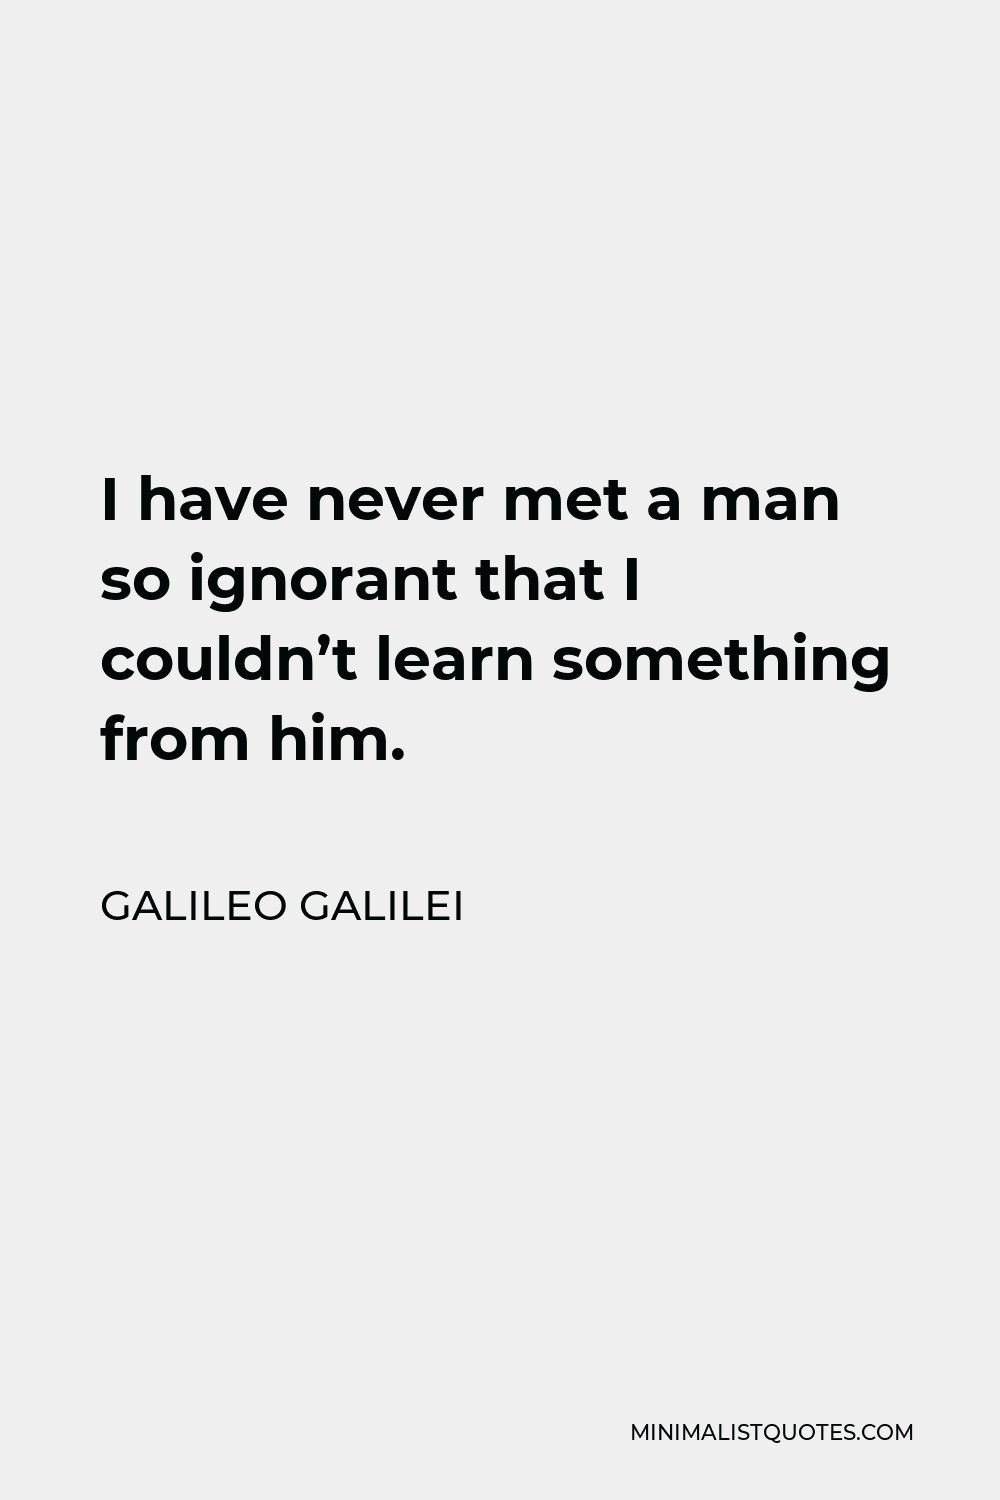 Galileo Galilei Quote - I have never met a man so ignorant that I couldn’t learn something from him.